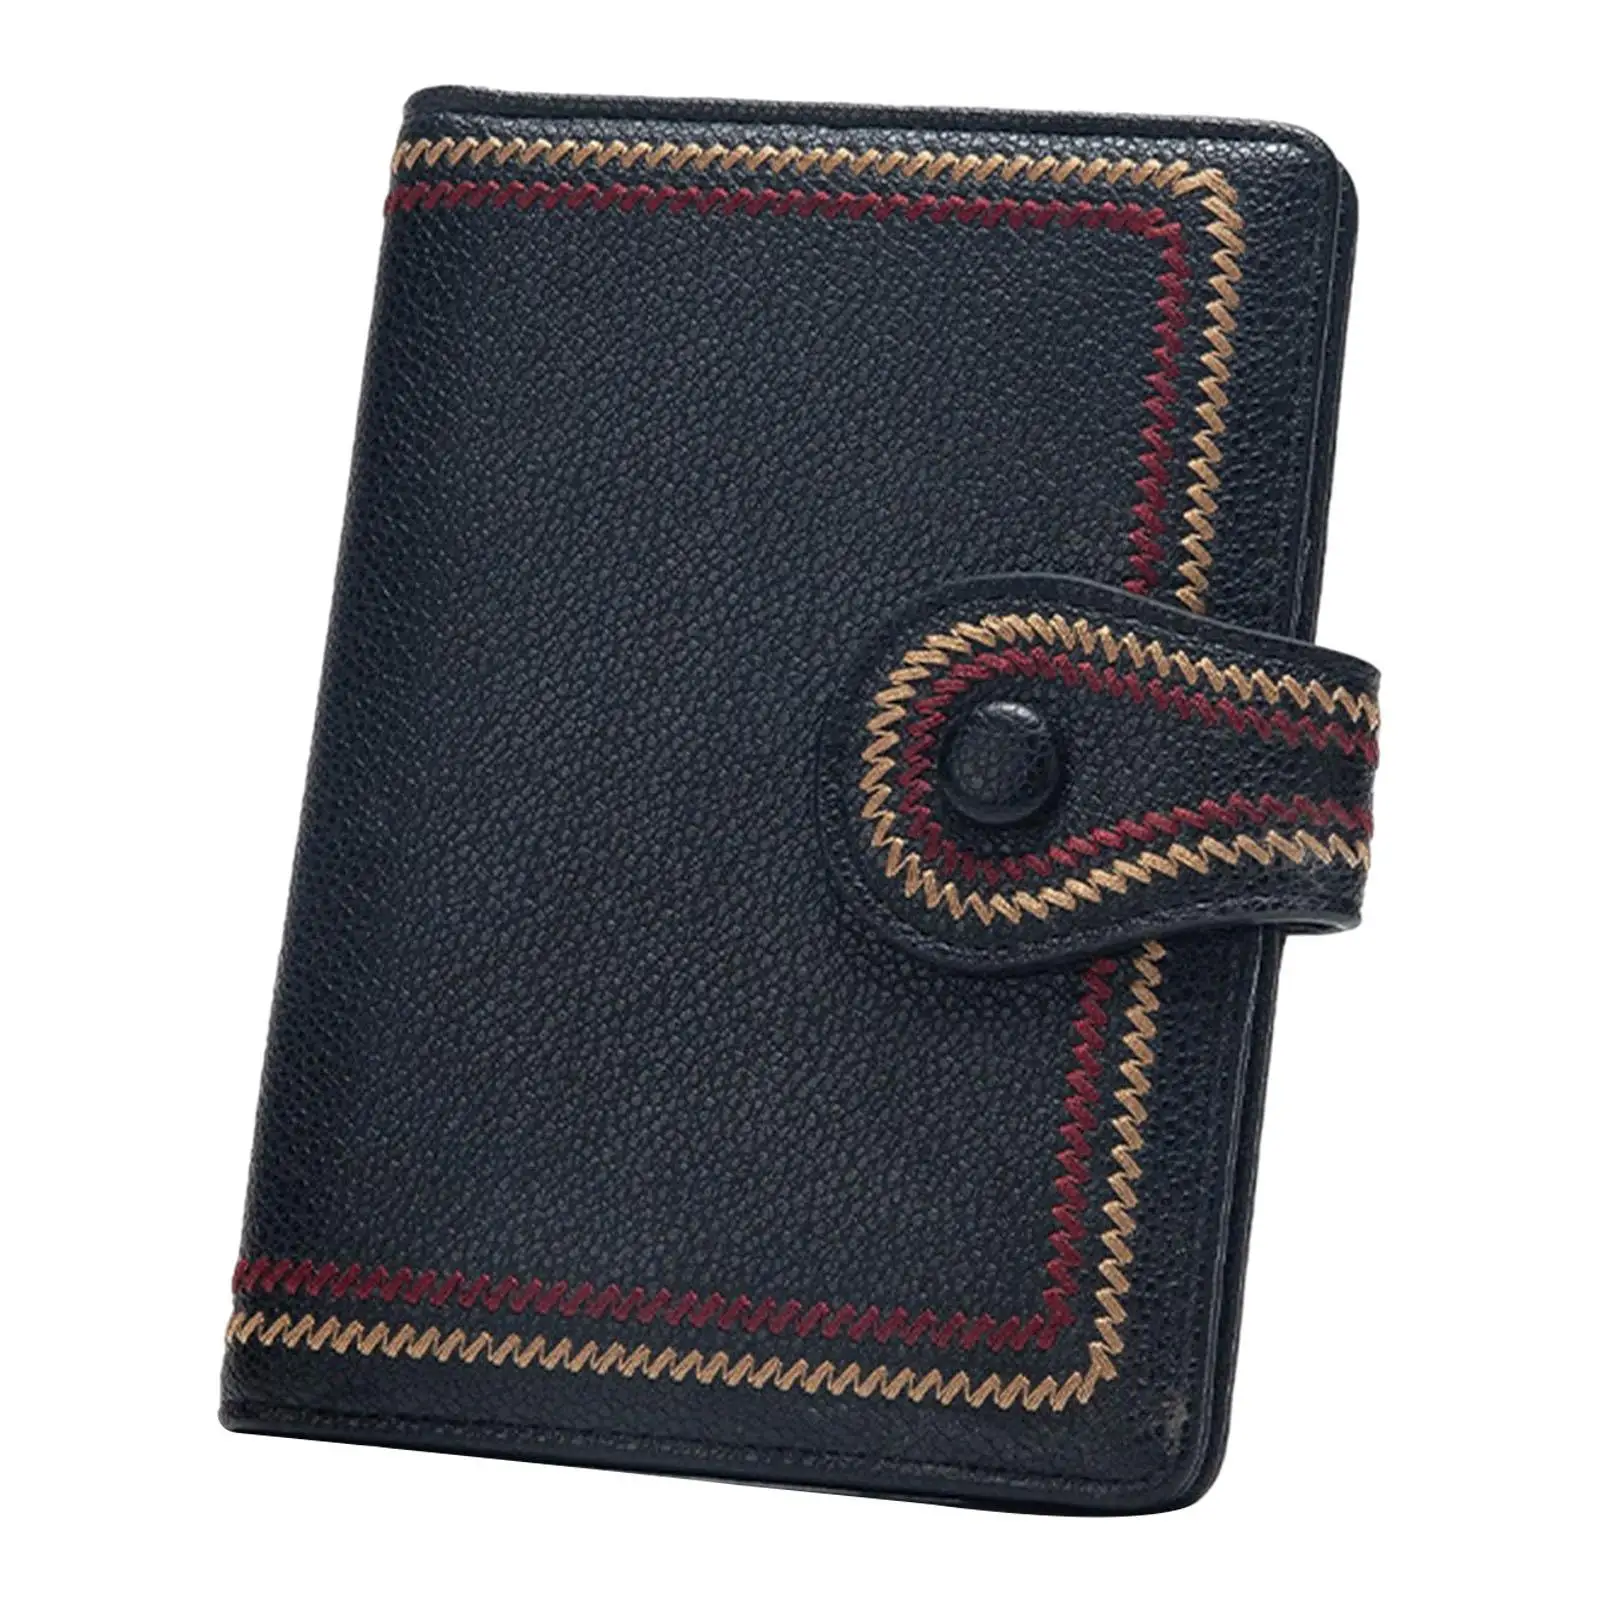 Leather Passports Cover for Cards Travel Passports Holder Wallet Document Organizer Case Men Women